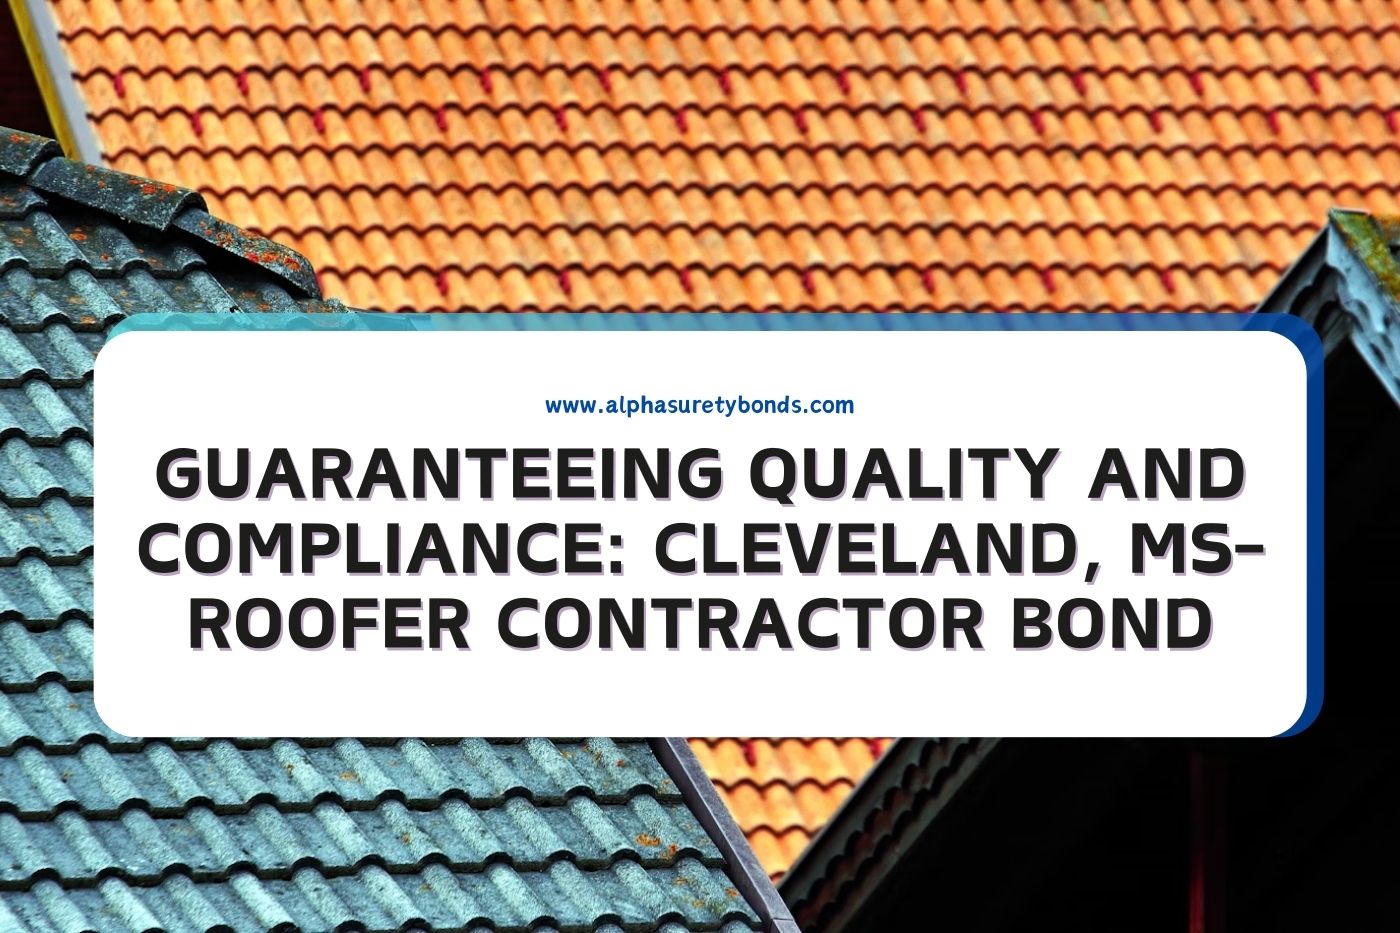 Guaranteeing Quality and Compliance: Cleveland, MS-Roofer Contractor Bond